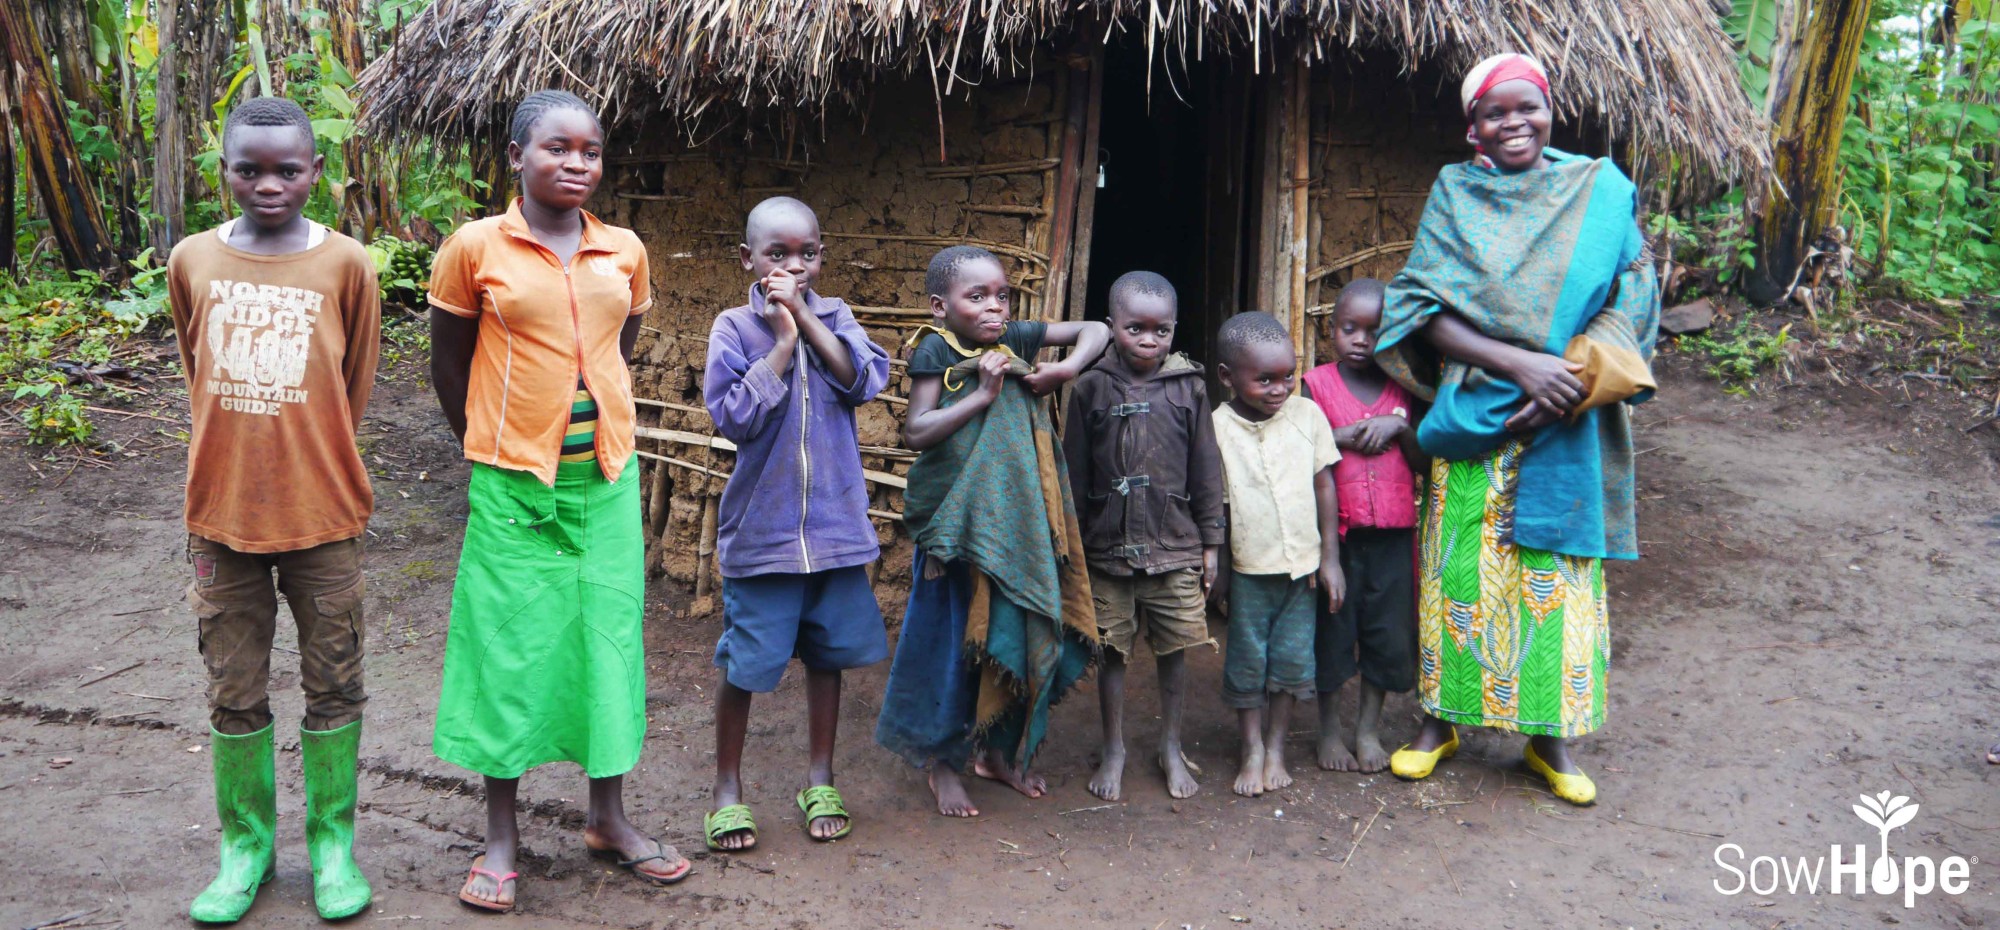 Marie Claire, a mother with her children in Kalonge, DR Congo. This mother is a member of an economic project specifically geared towards helping survivors of armed violence in the region. Photo by Mary Dailey Brown, November 2015.